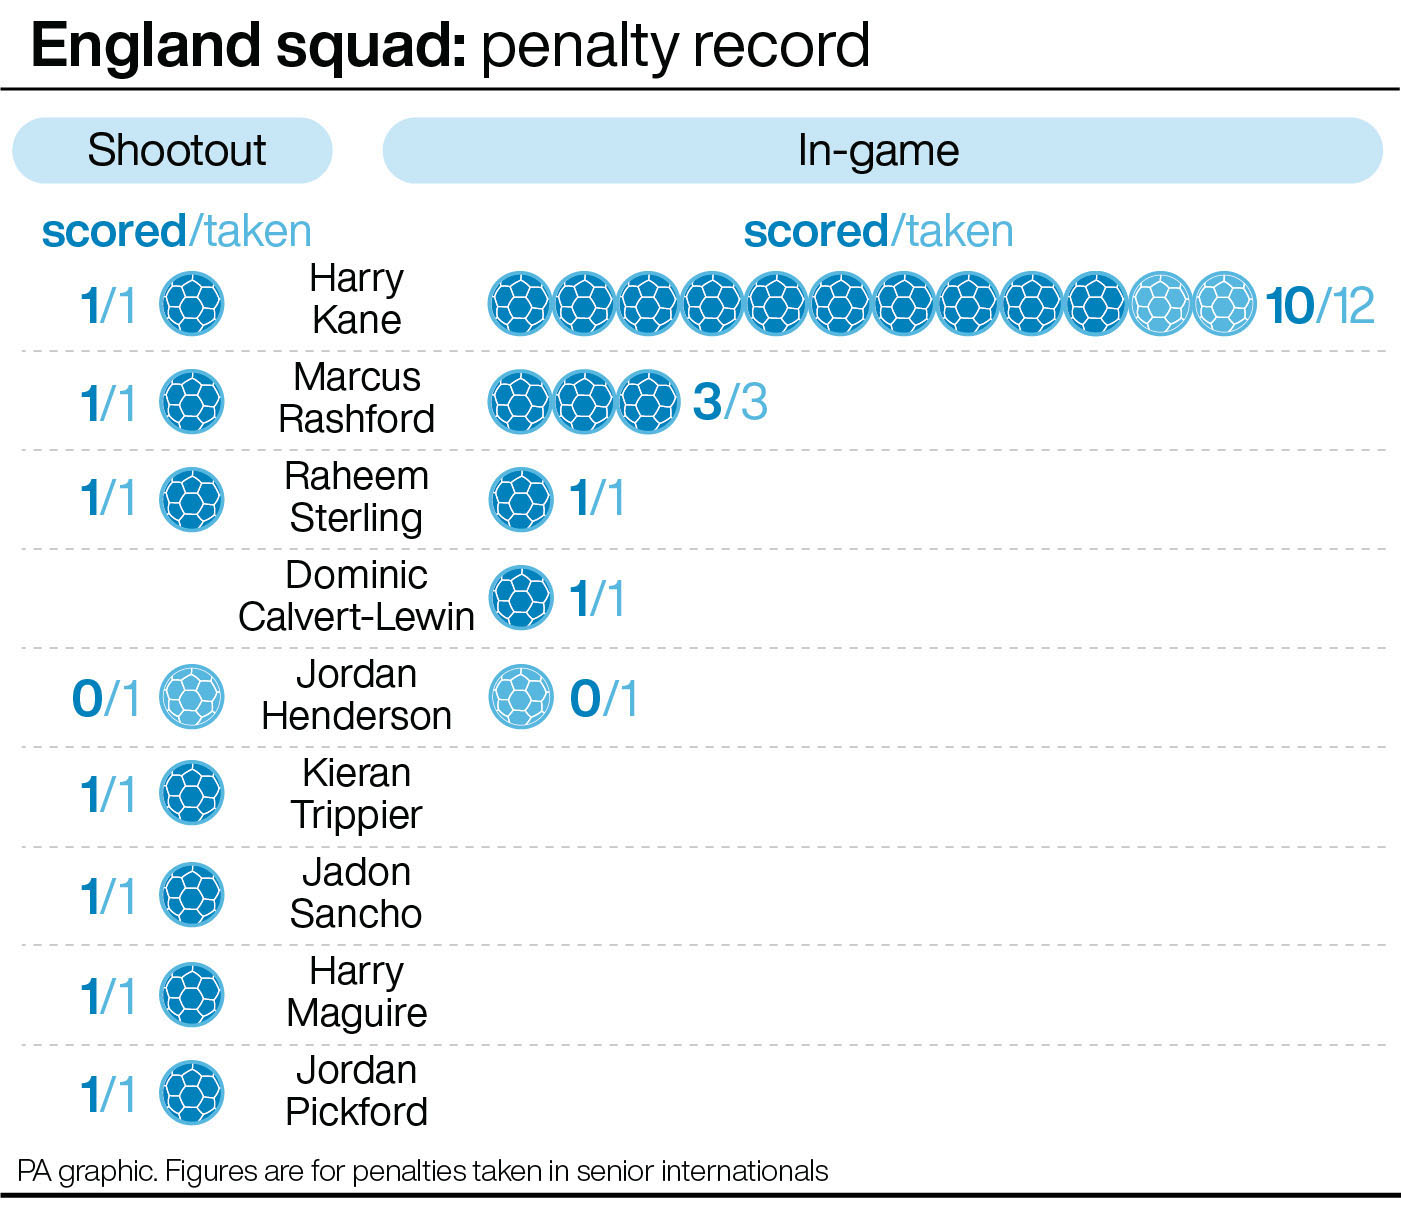 England squad: penalty record